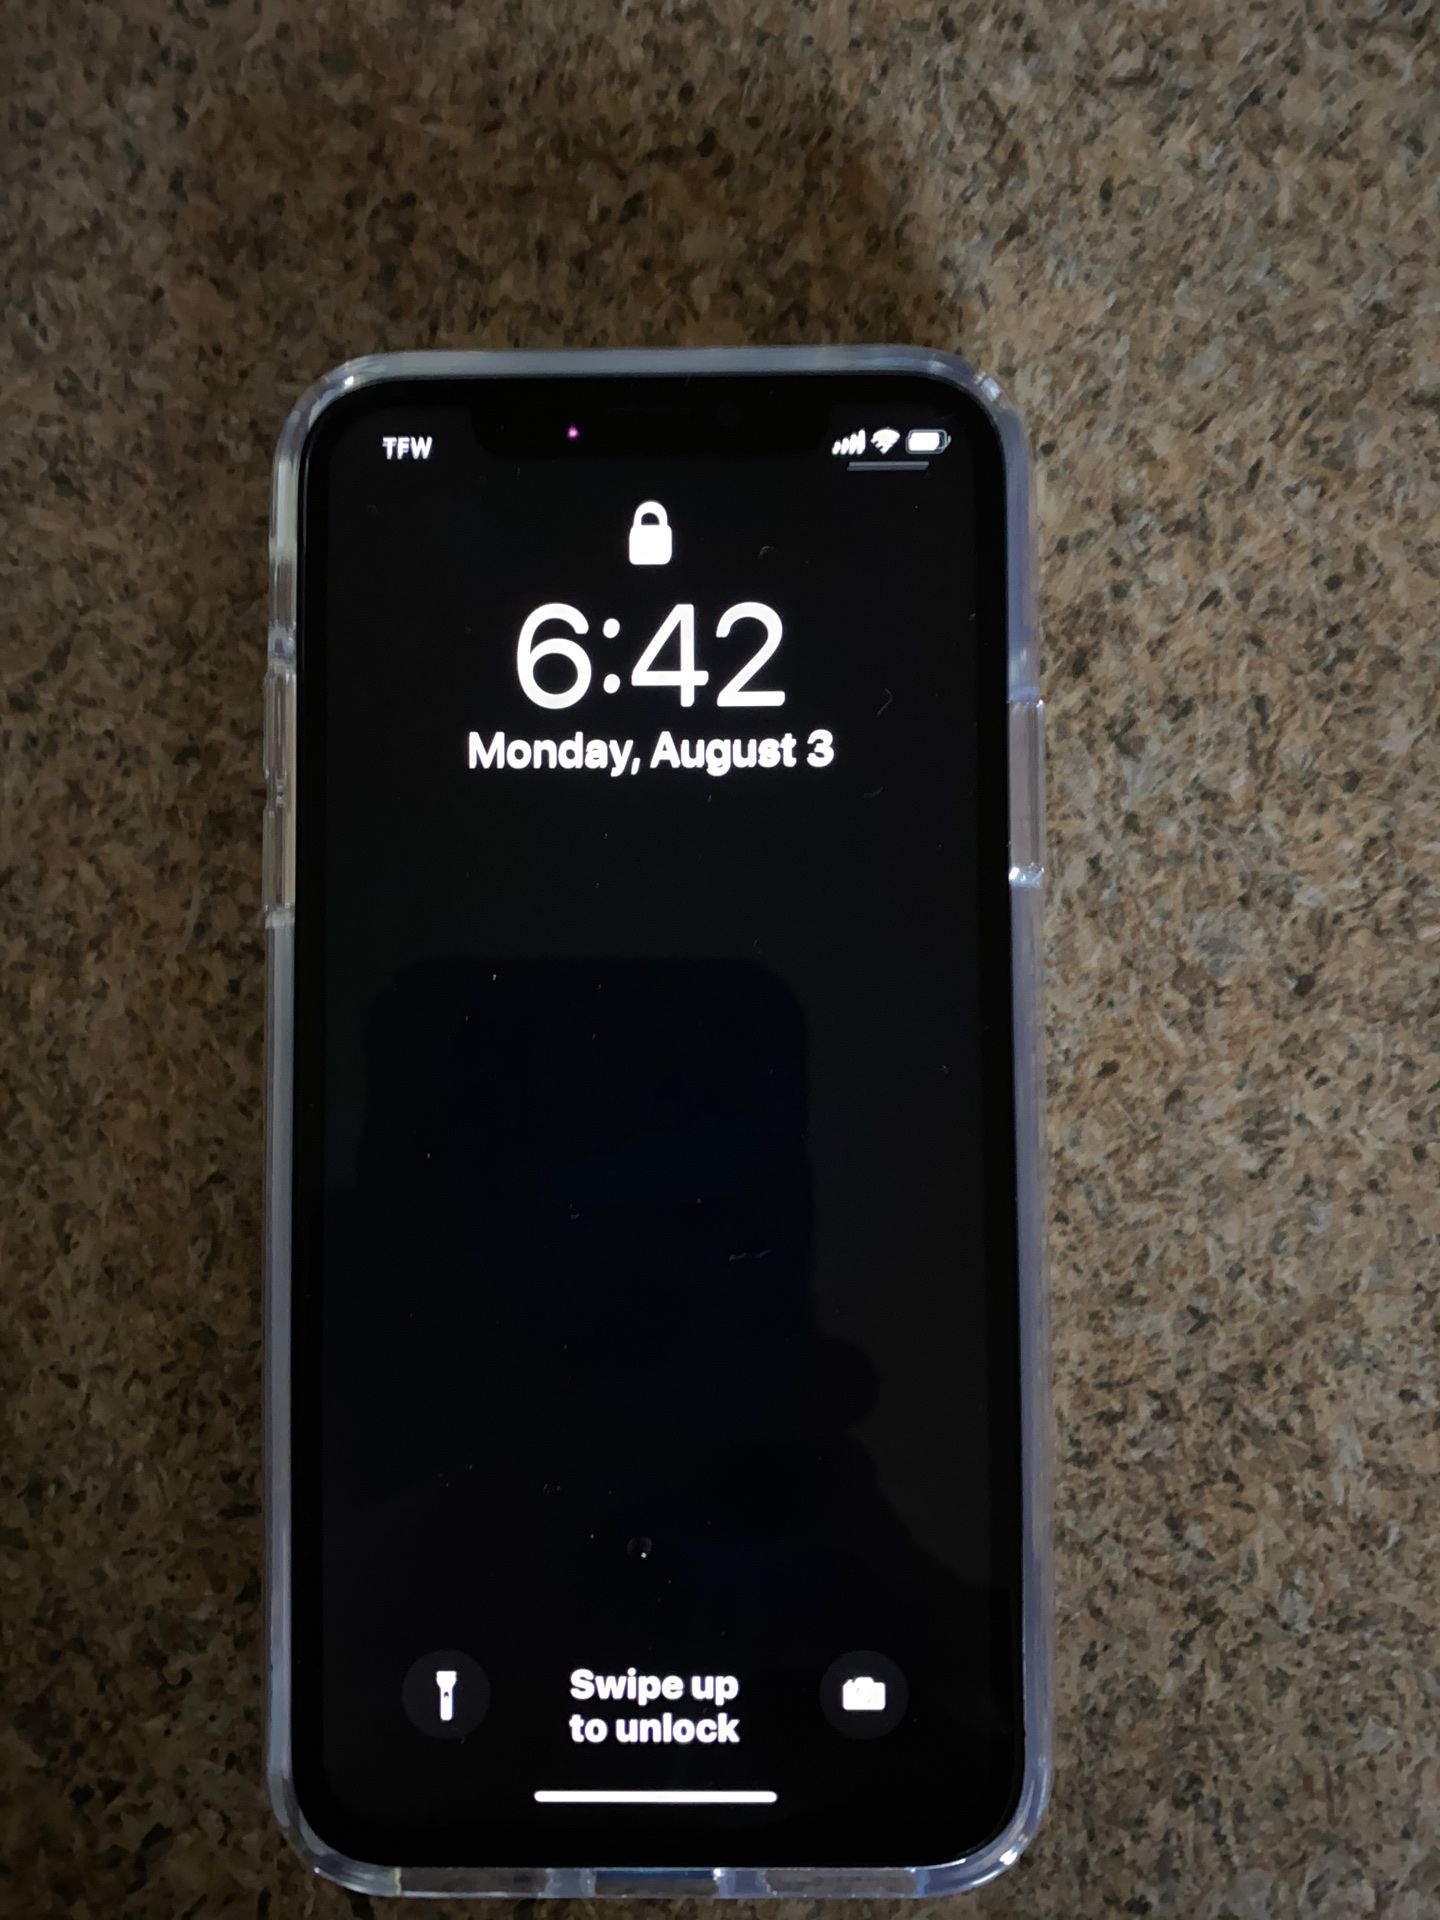 iPhone X 64 GB (UNLOCKED) any carrier will work with this phone. The price is 350 firm, no haggling and no Trading.Comes with brand new clear case.